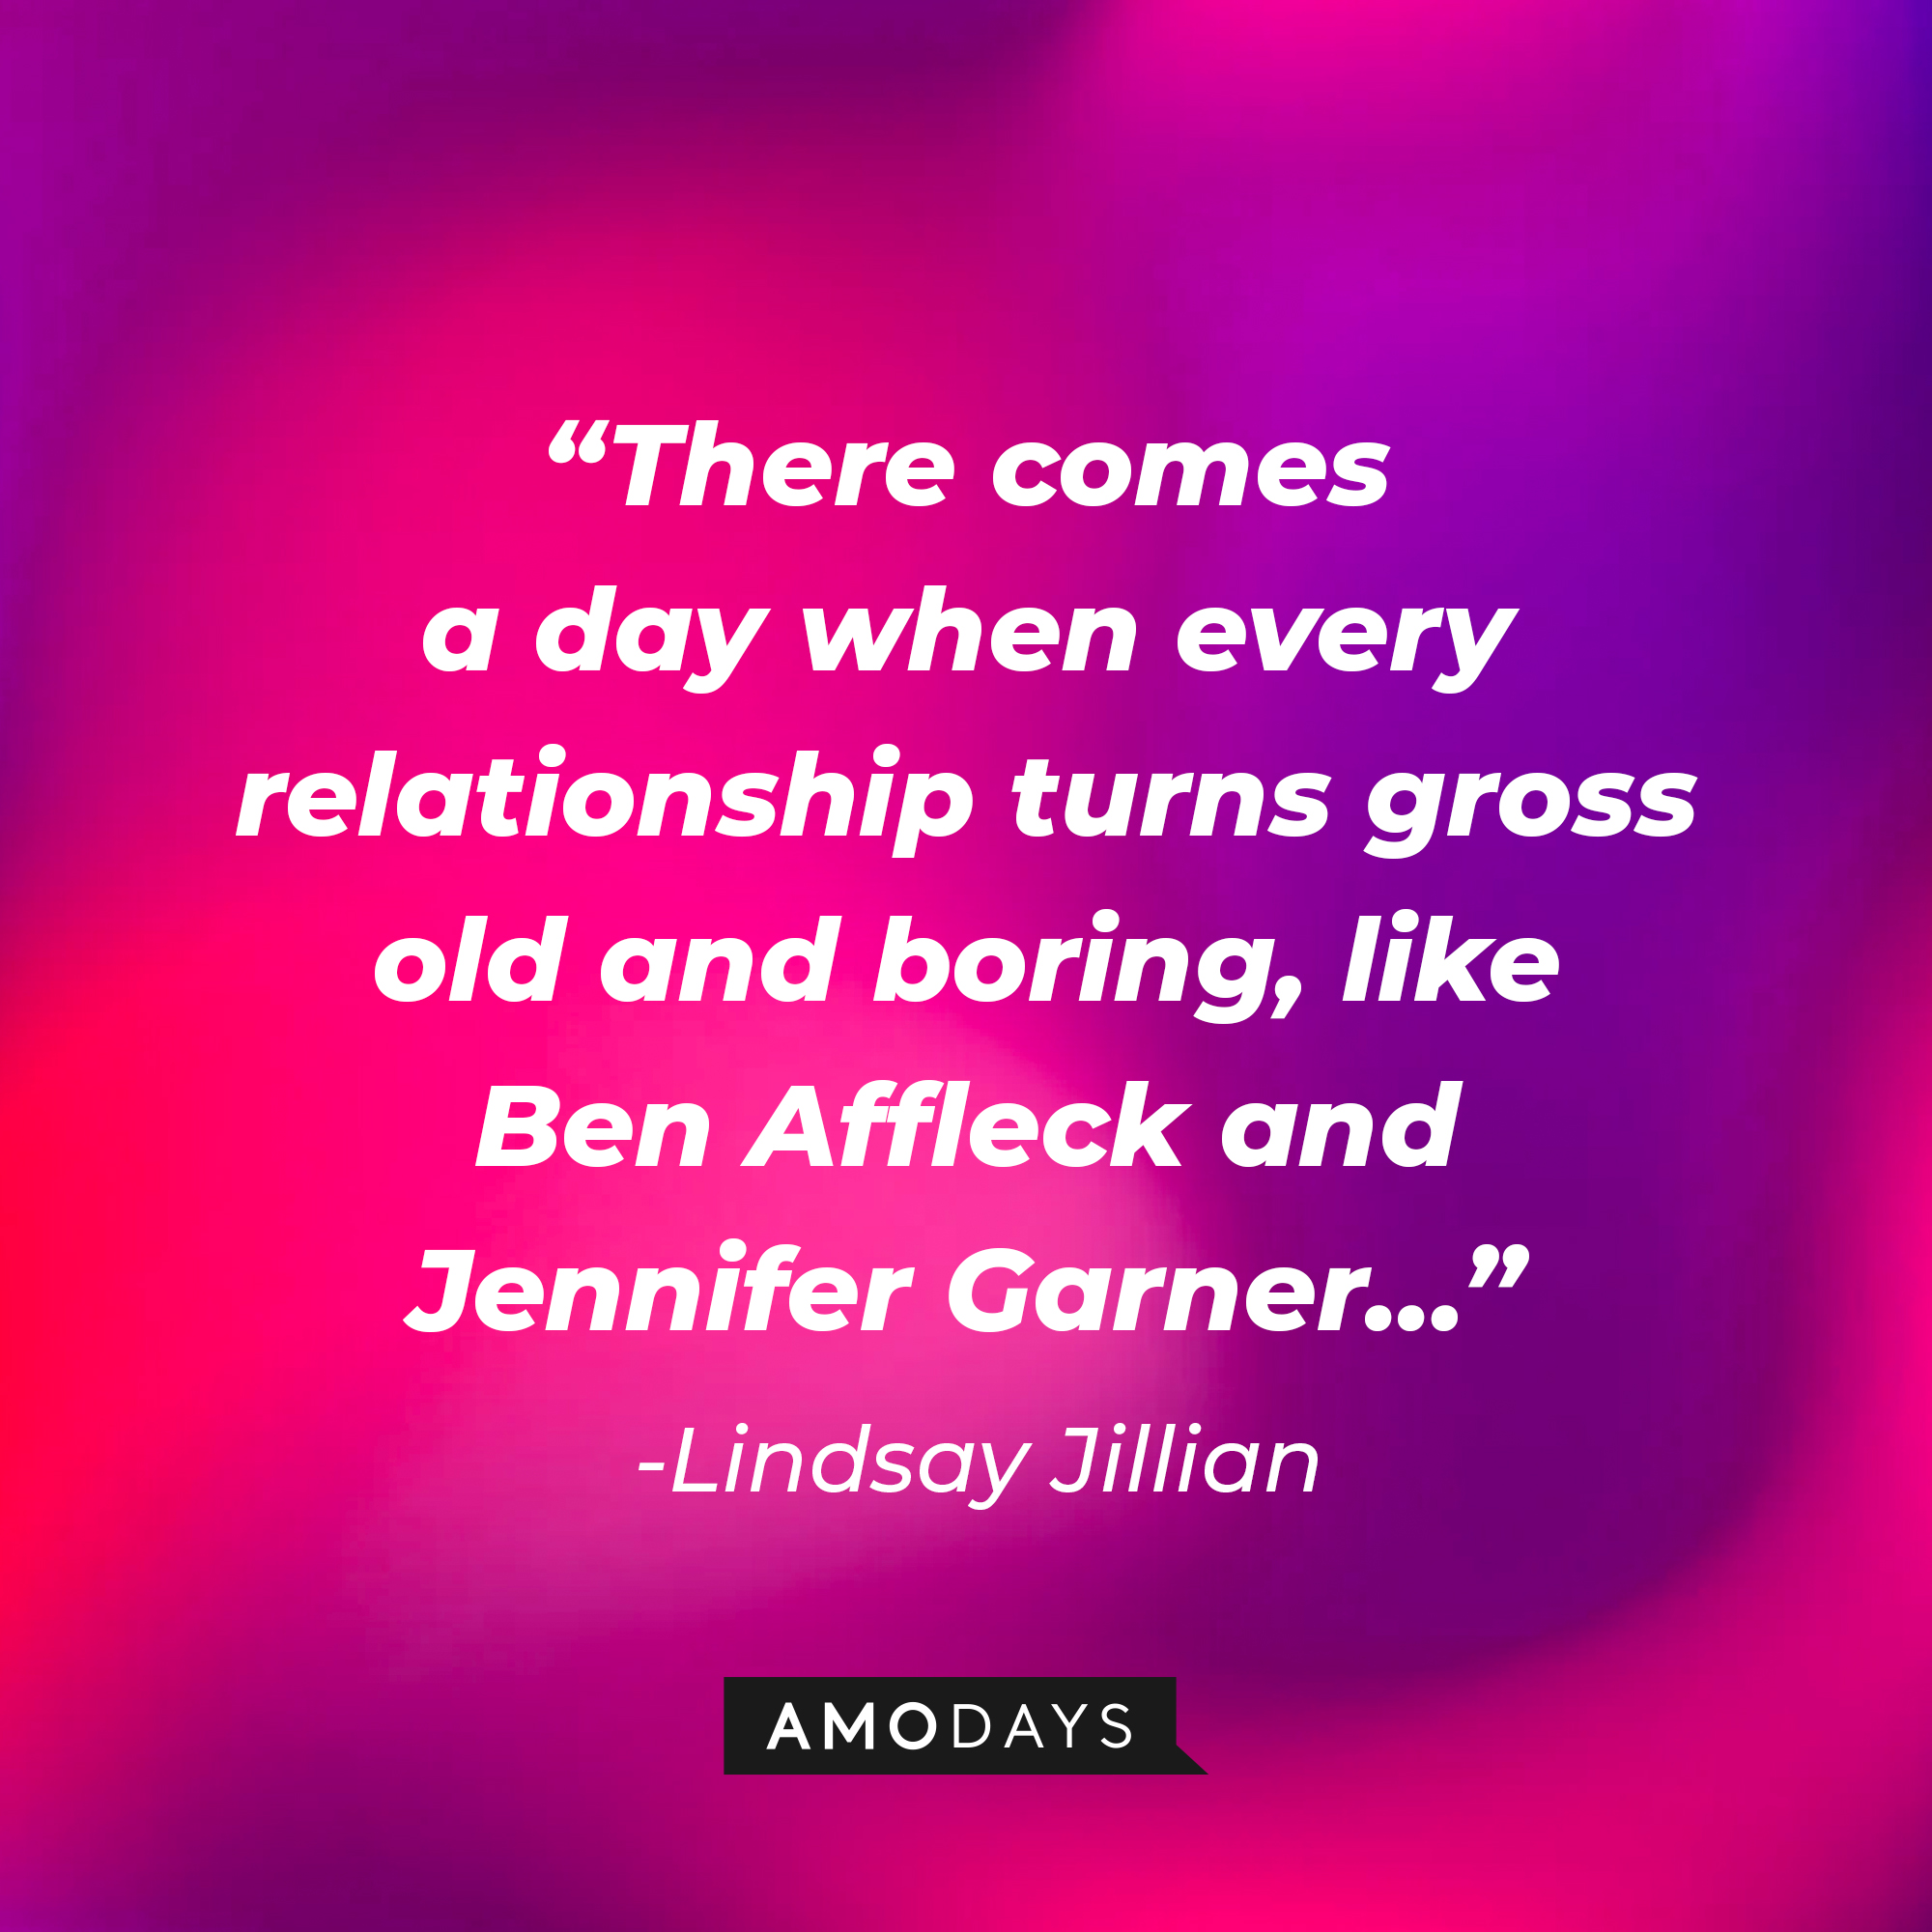 Lindsay Jillian’s quote: “There comes a day when every relationship turns gross old and boring, like Ben Affleck and Jennifer Garner…” | Source: AmoDays